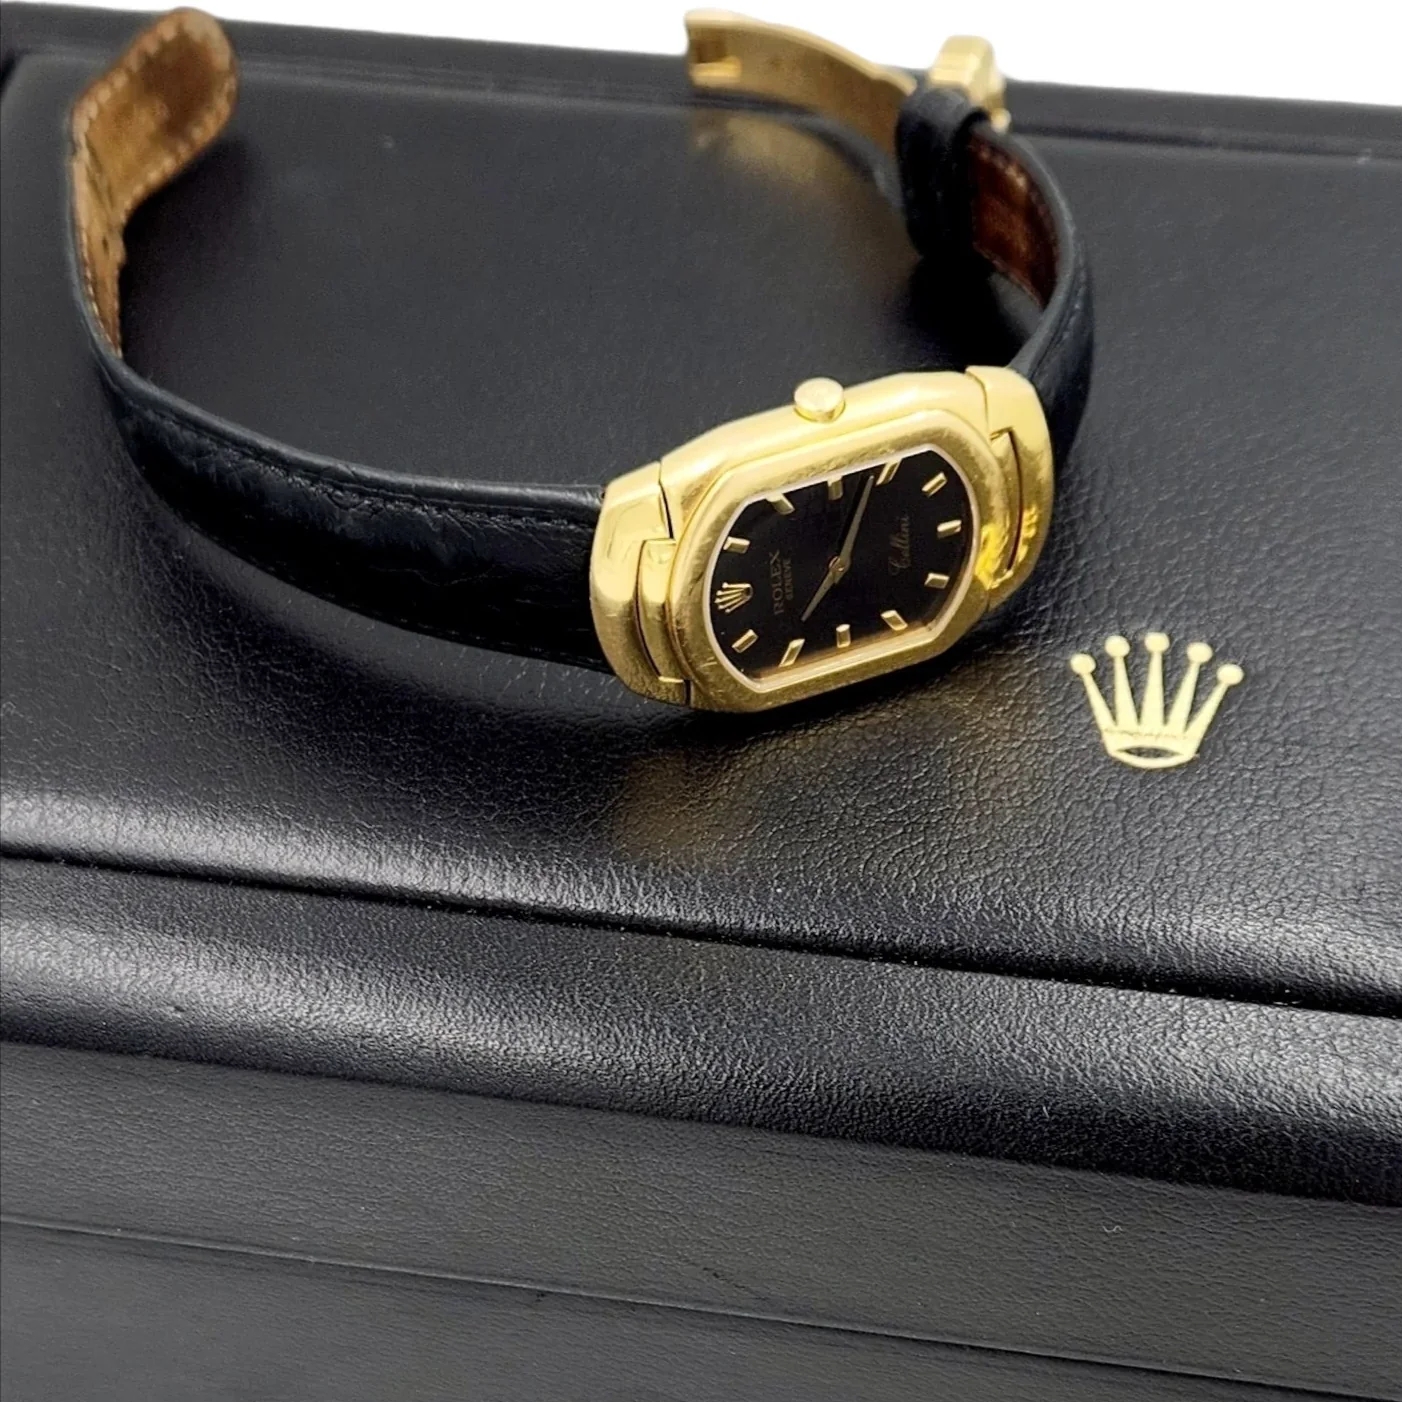 Men's Rolex Cellini Vintage 18K Yellow Gold Watch with Black Dial and Black Leather Strap. (Pre-Owned 6633)